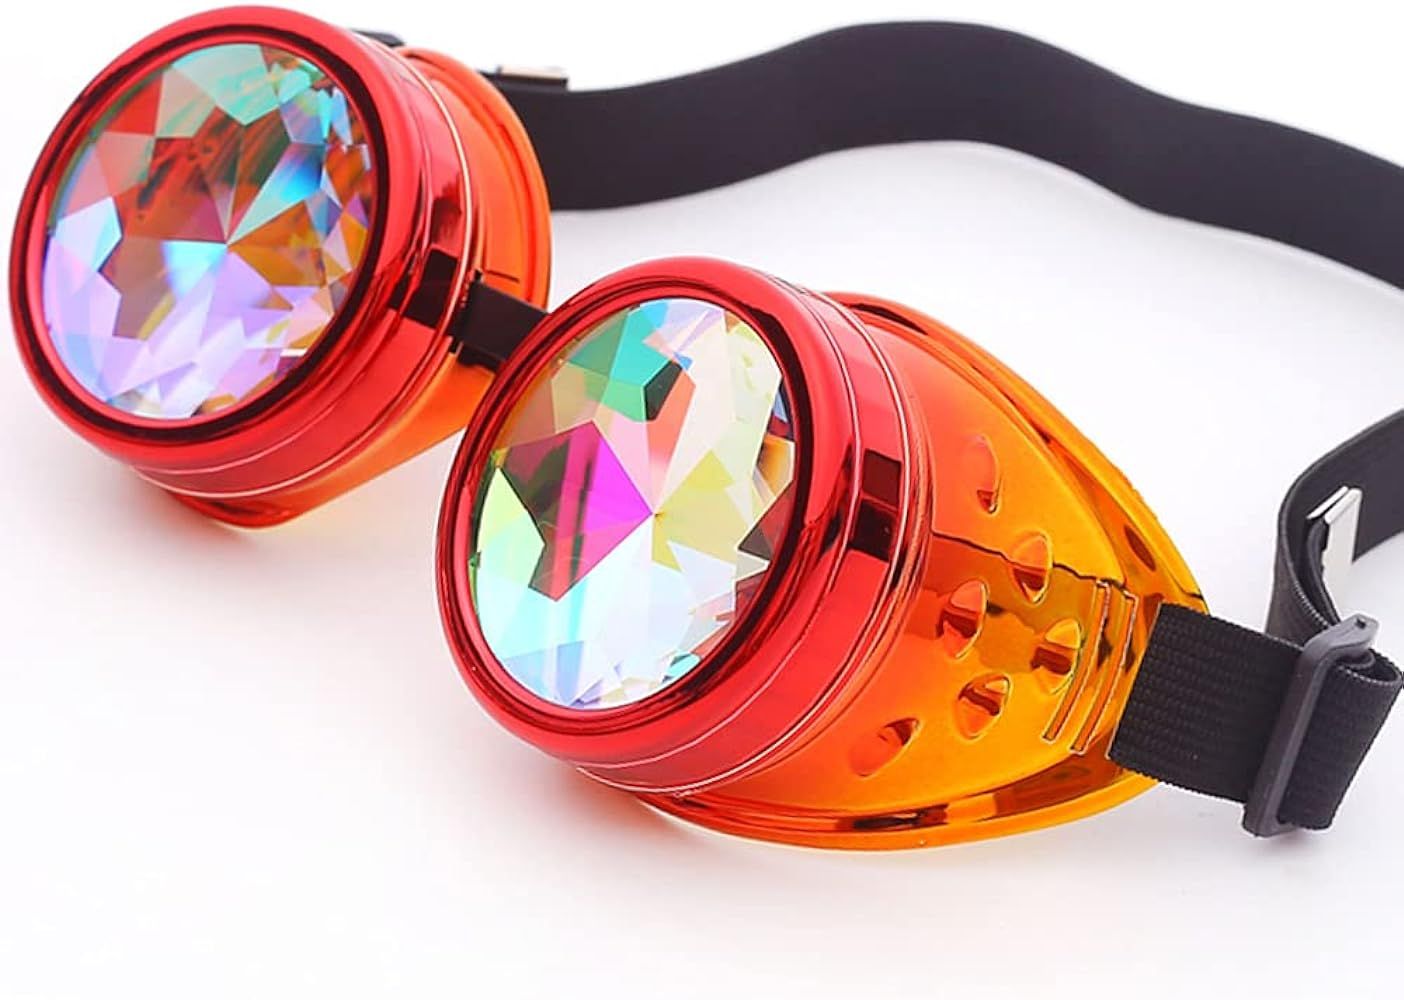 Kaleidoscope Goggles for Raves Trippy Psychedelic Steampunk Glasses with Rainbow Prism Diffraction C | Amazon (US)